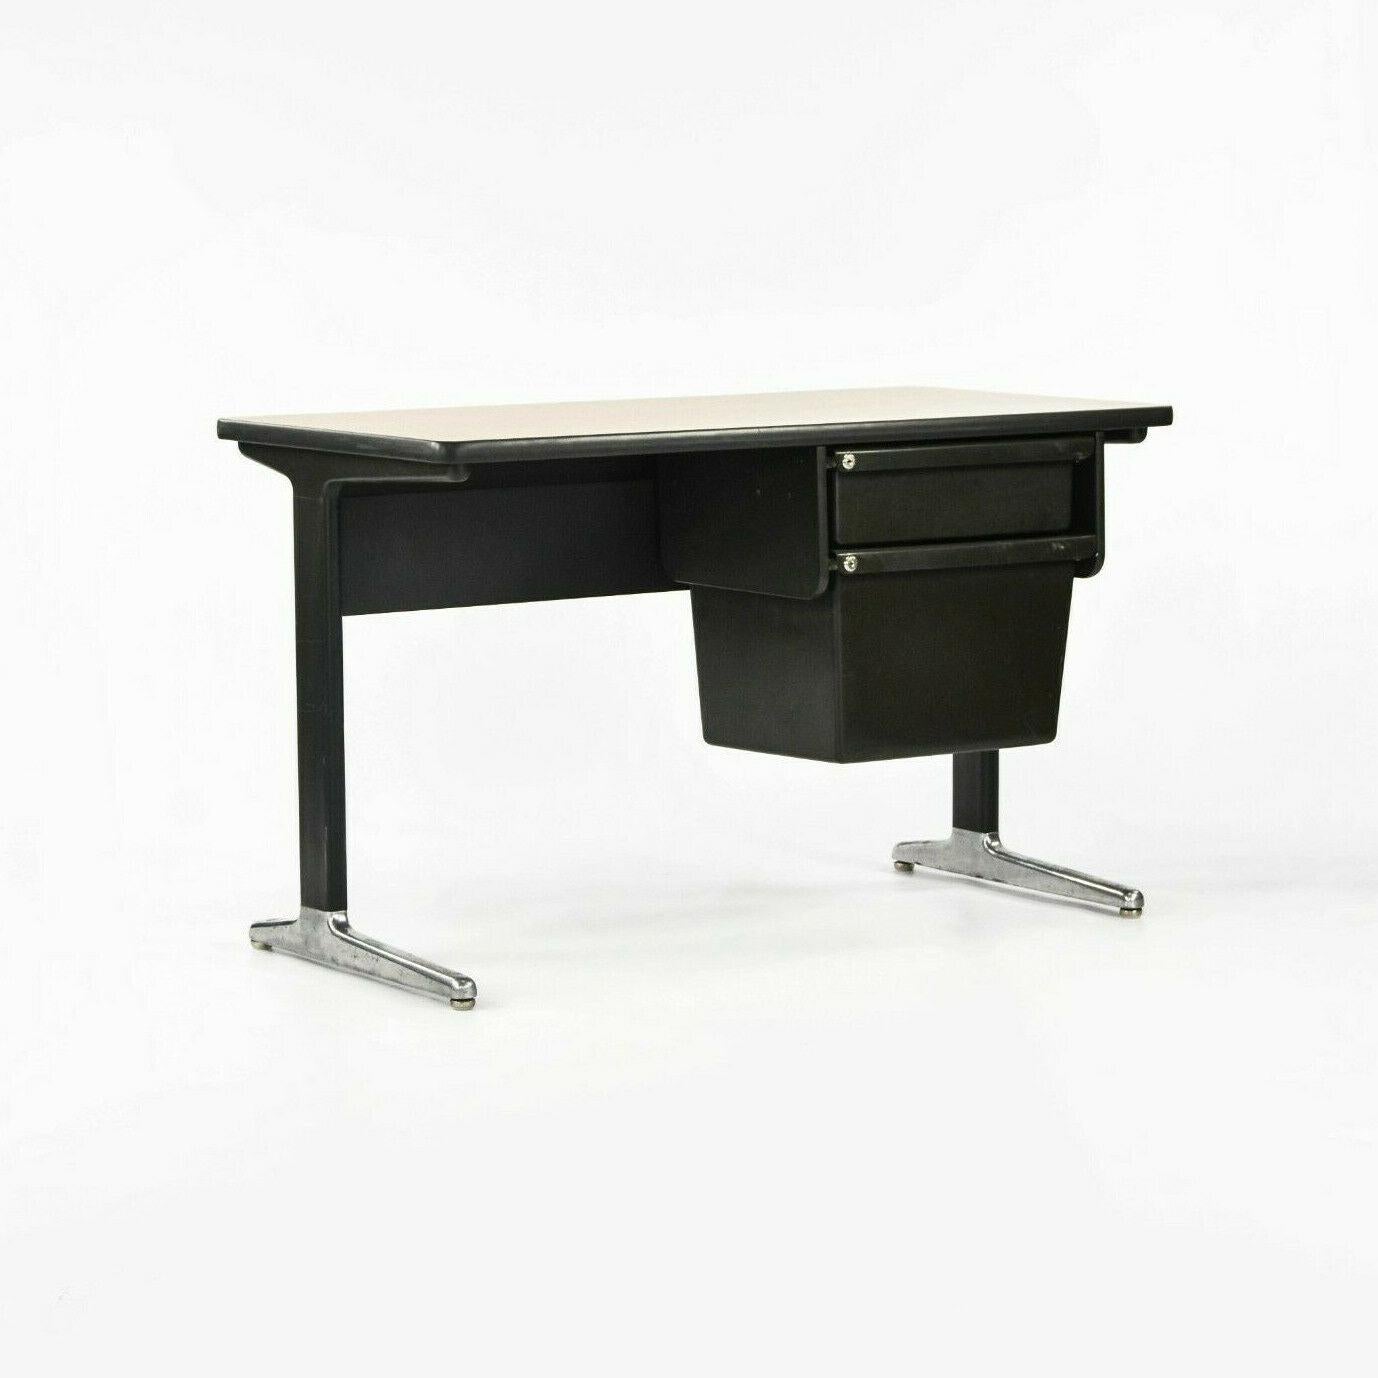 Listed for sale is an original 1970s Herman Miller Action Office desk with two drawers, designed by George Nelson and Robert Probst. This is a delightfully original example, which came out of an office in North Carolina, fully outfitted in Action